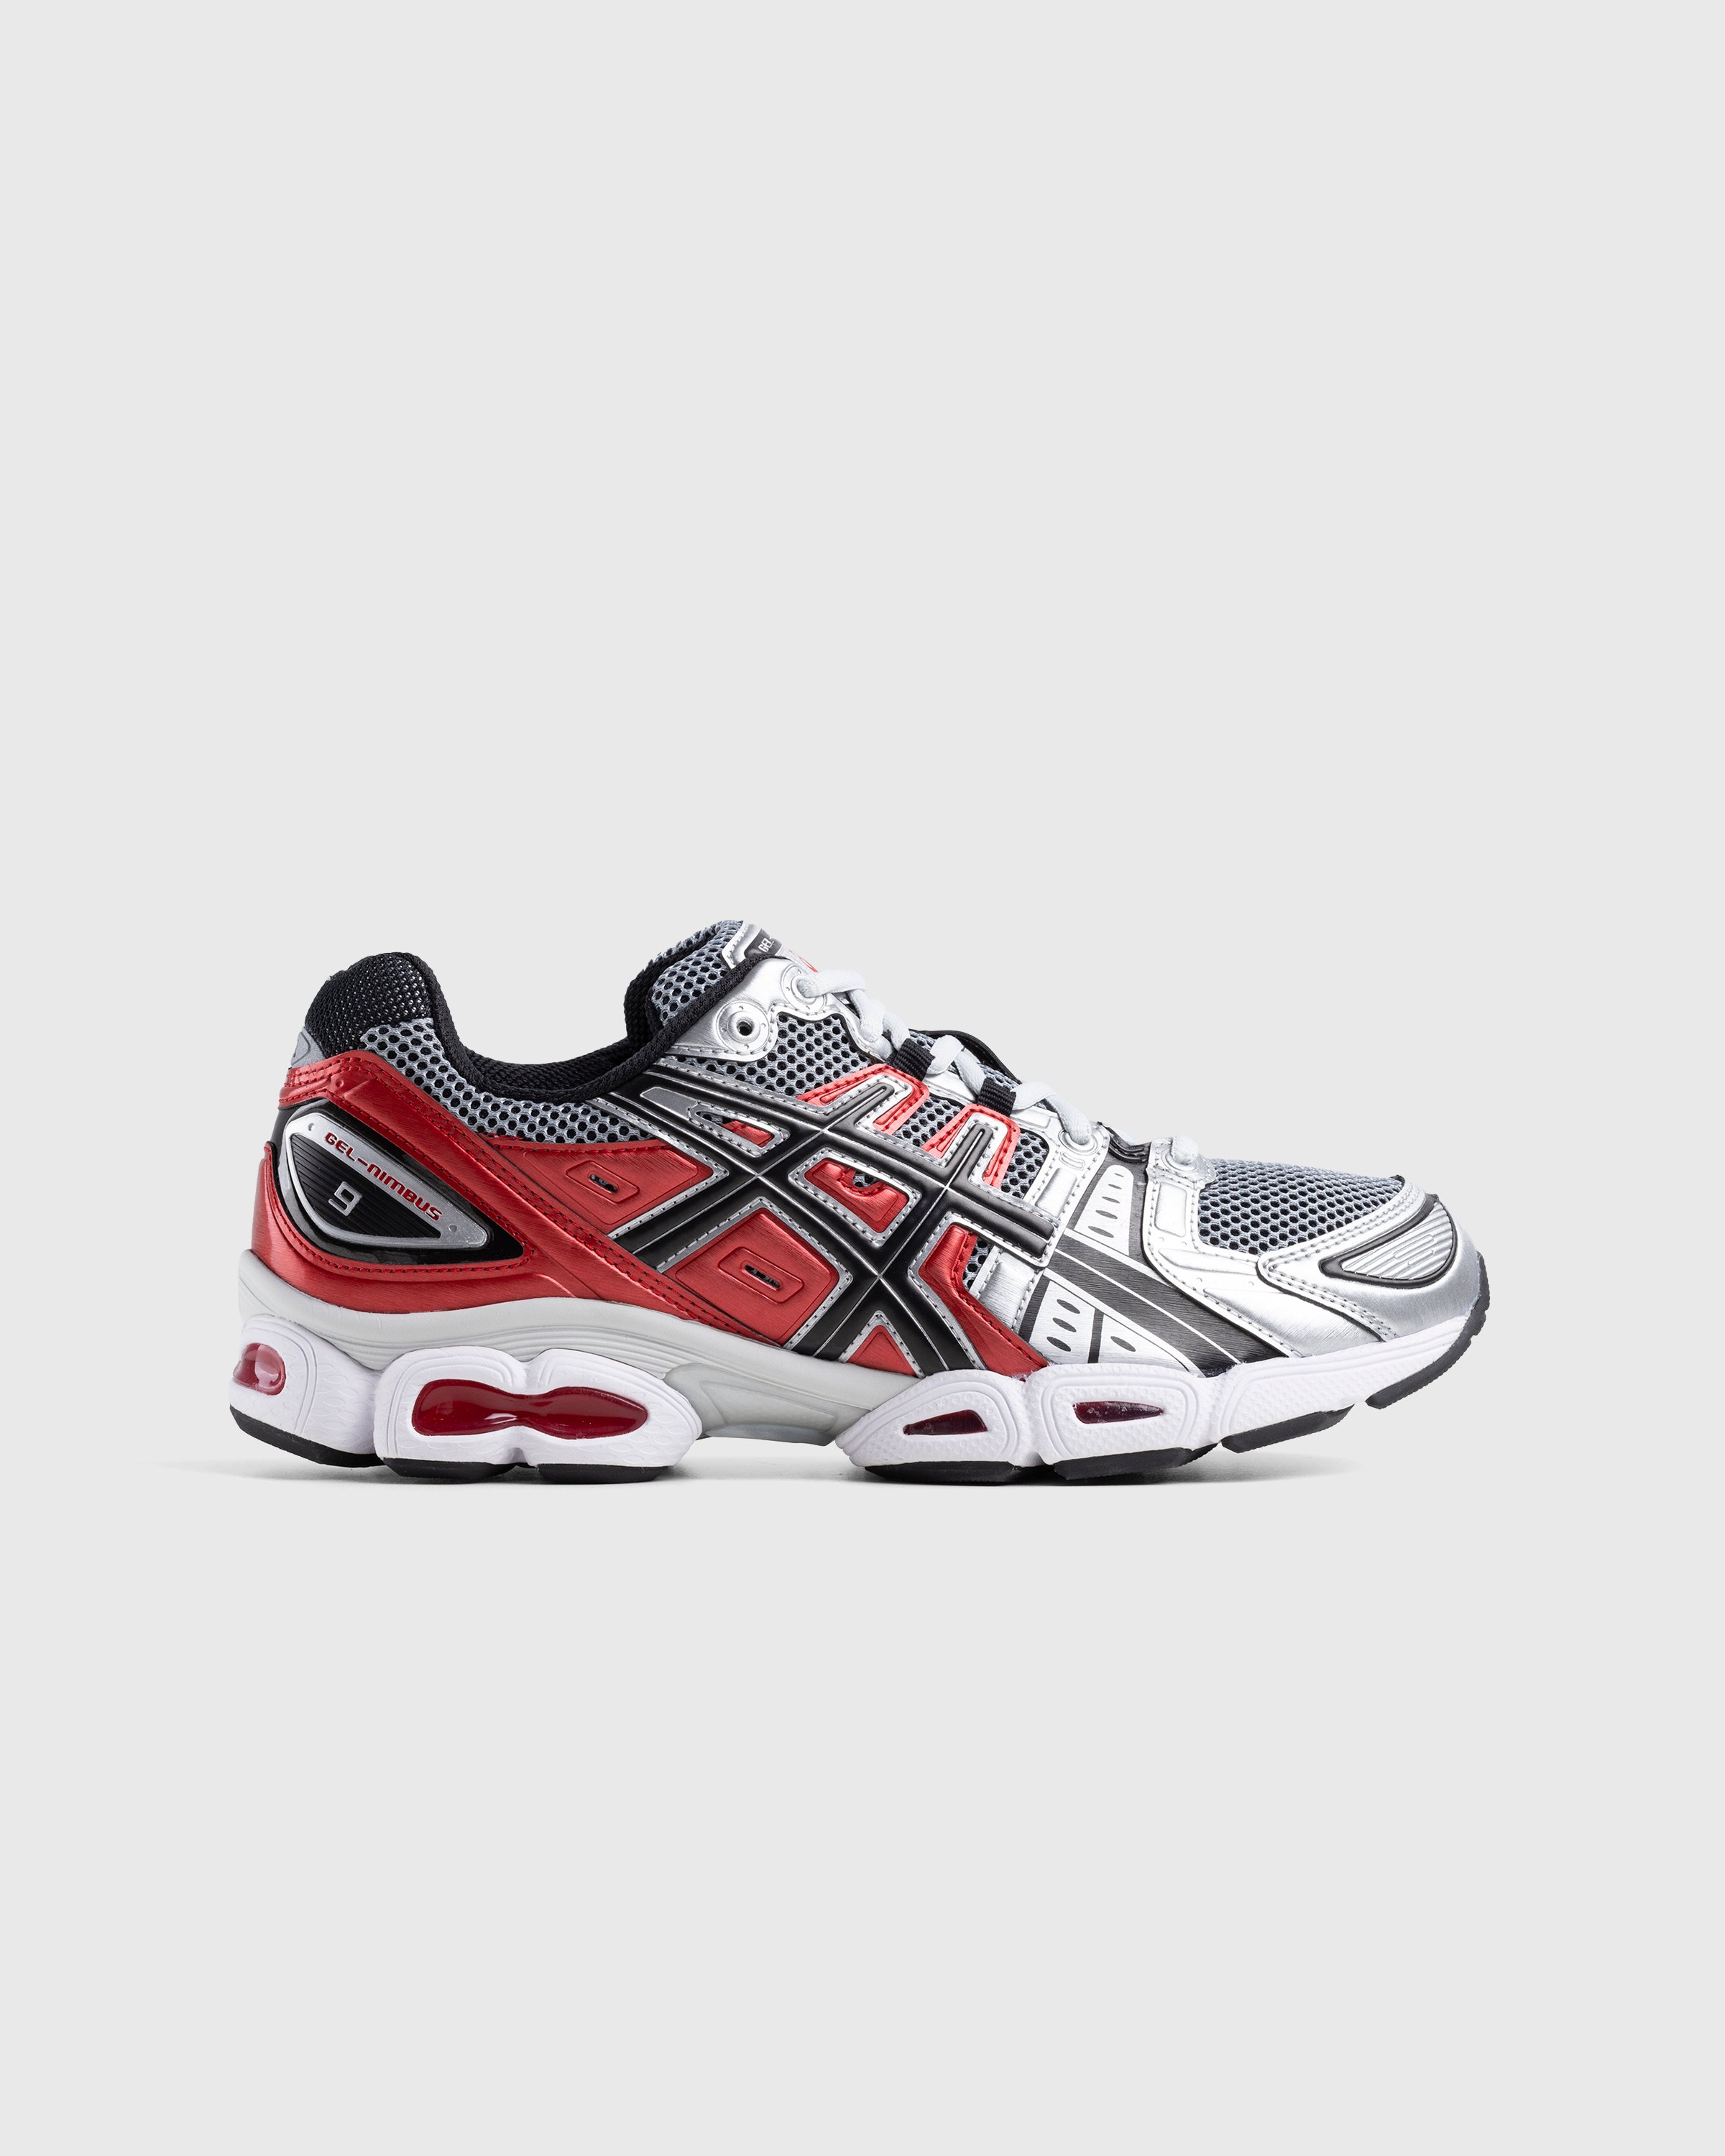 asics - Gel-Nimbus 9 Pure Silver/Classic Red - Footwear - Red - Image 1